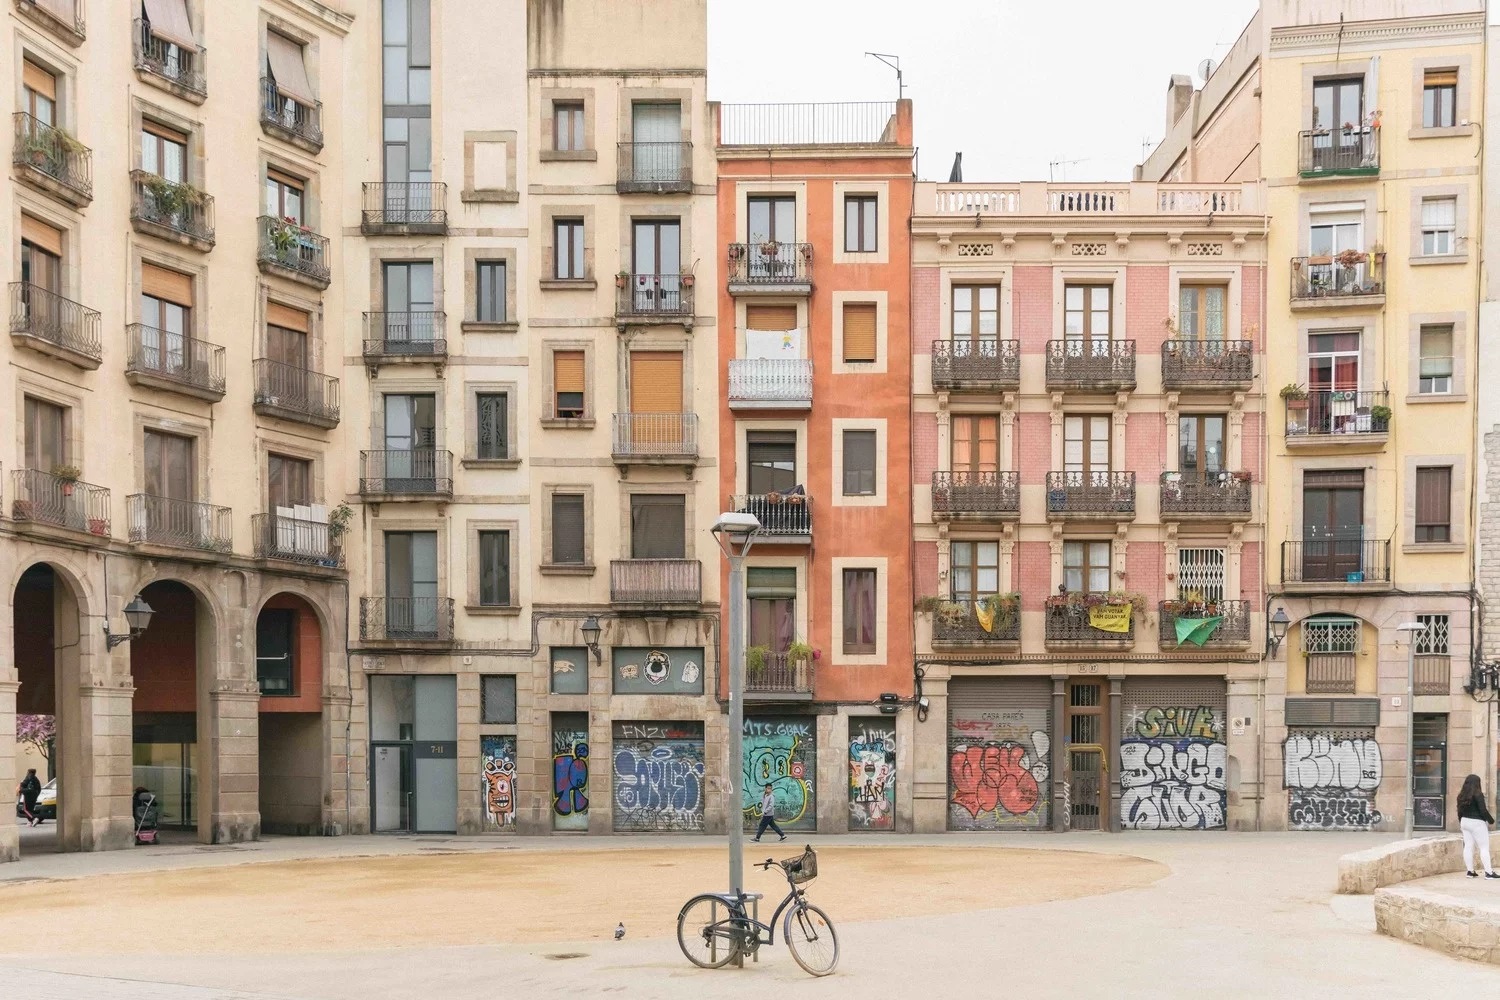 Barcelona surpasses Madrid in real estate investments